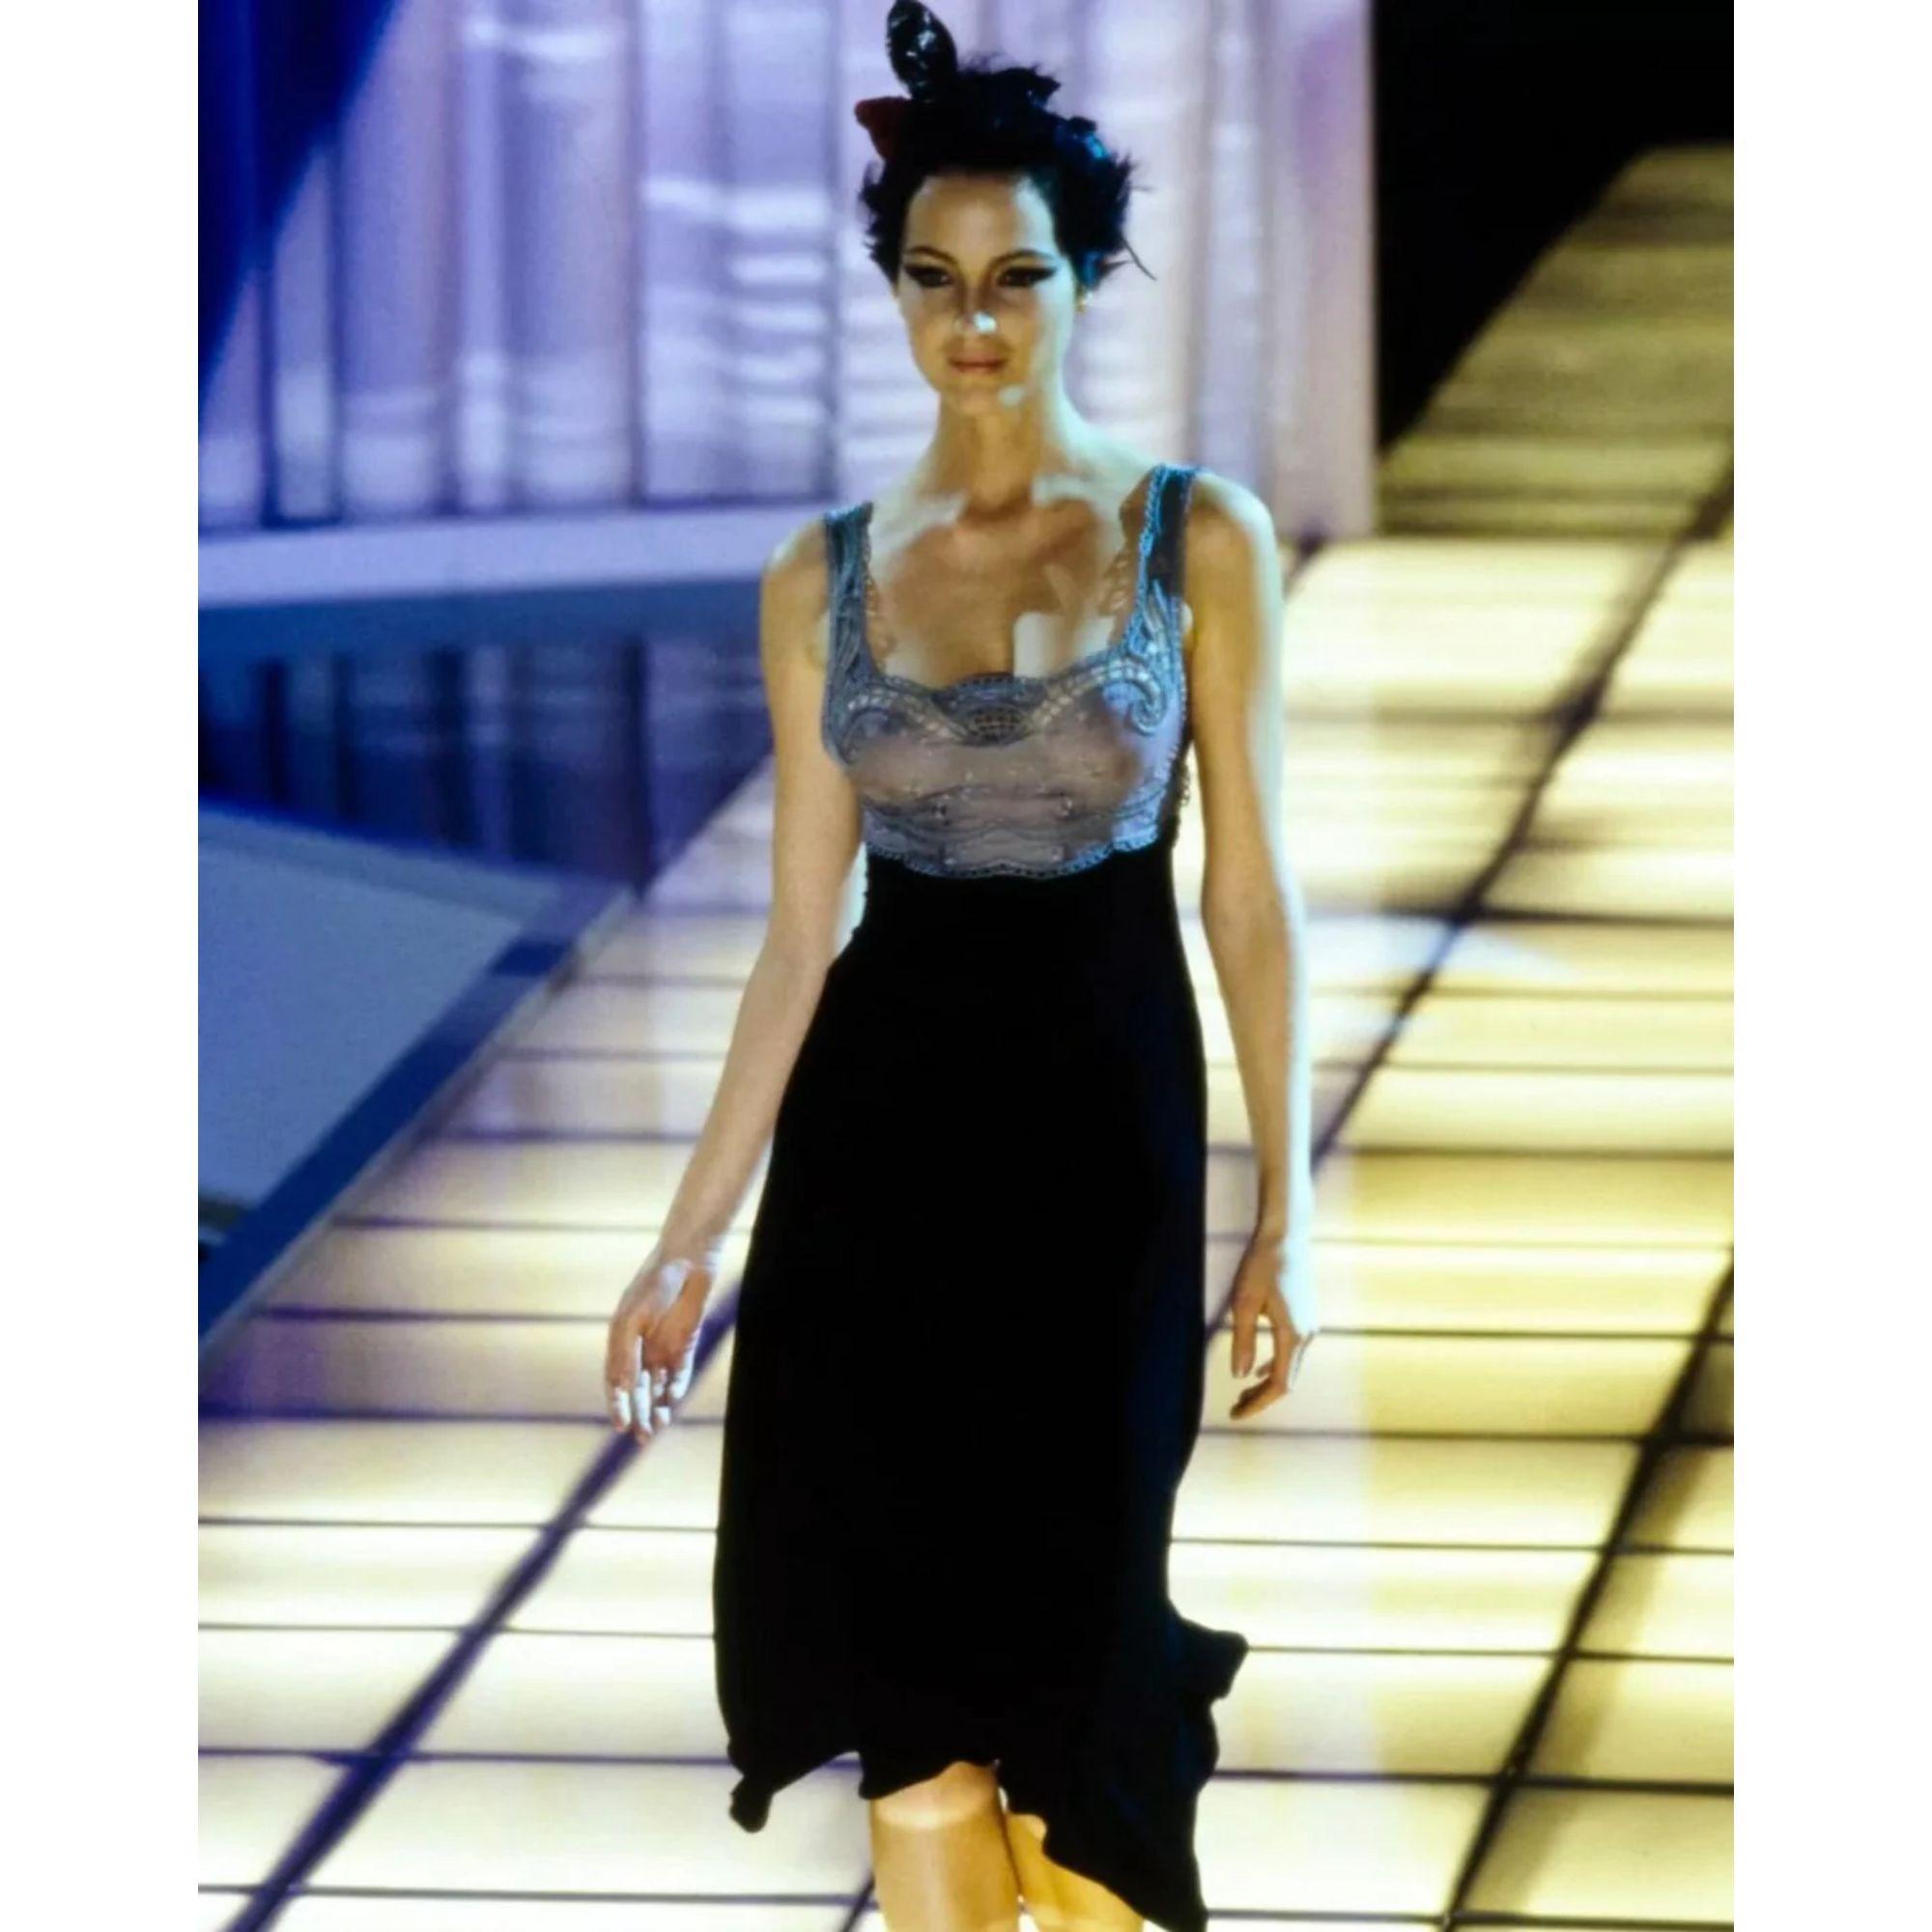 S/S 1997 Gianni Versace gray lace bust and black crepe silk midi dress. Lace embroidered, scalloped sleeveless bodice with concealed side zip closure. Fitted waist and flare hem is super flattering. As seen on the runway and in the ad campaign